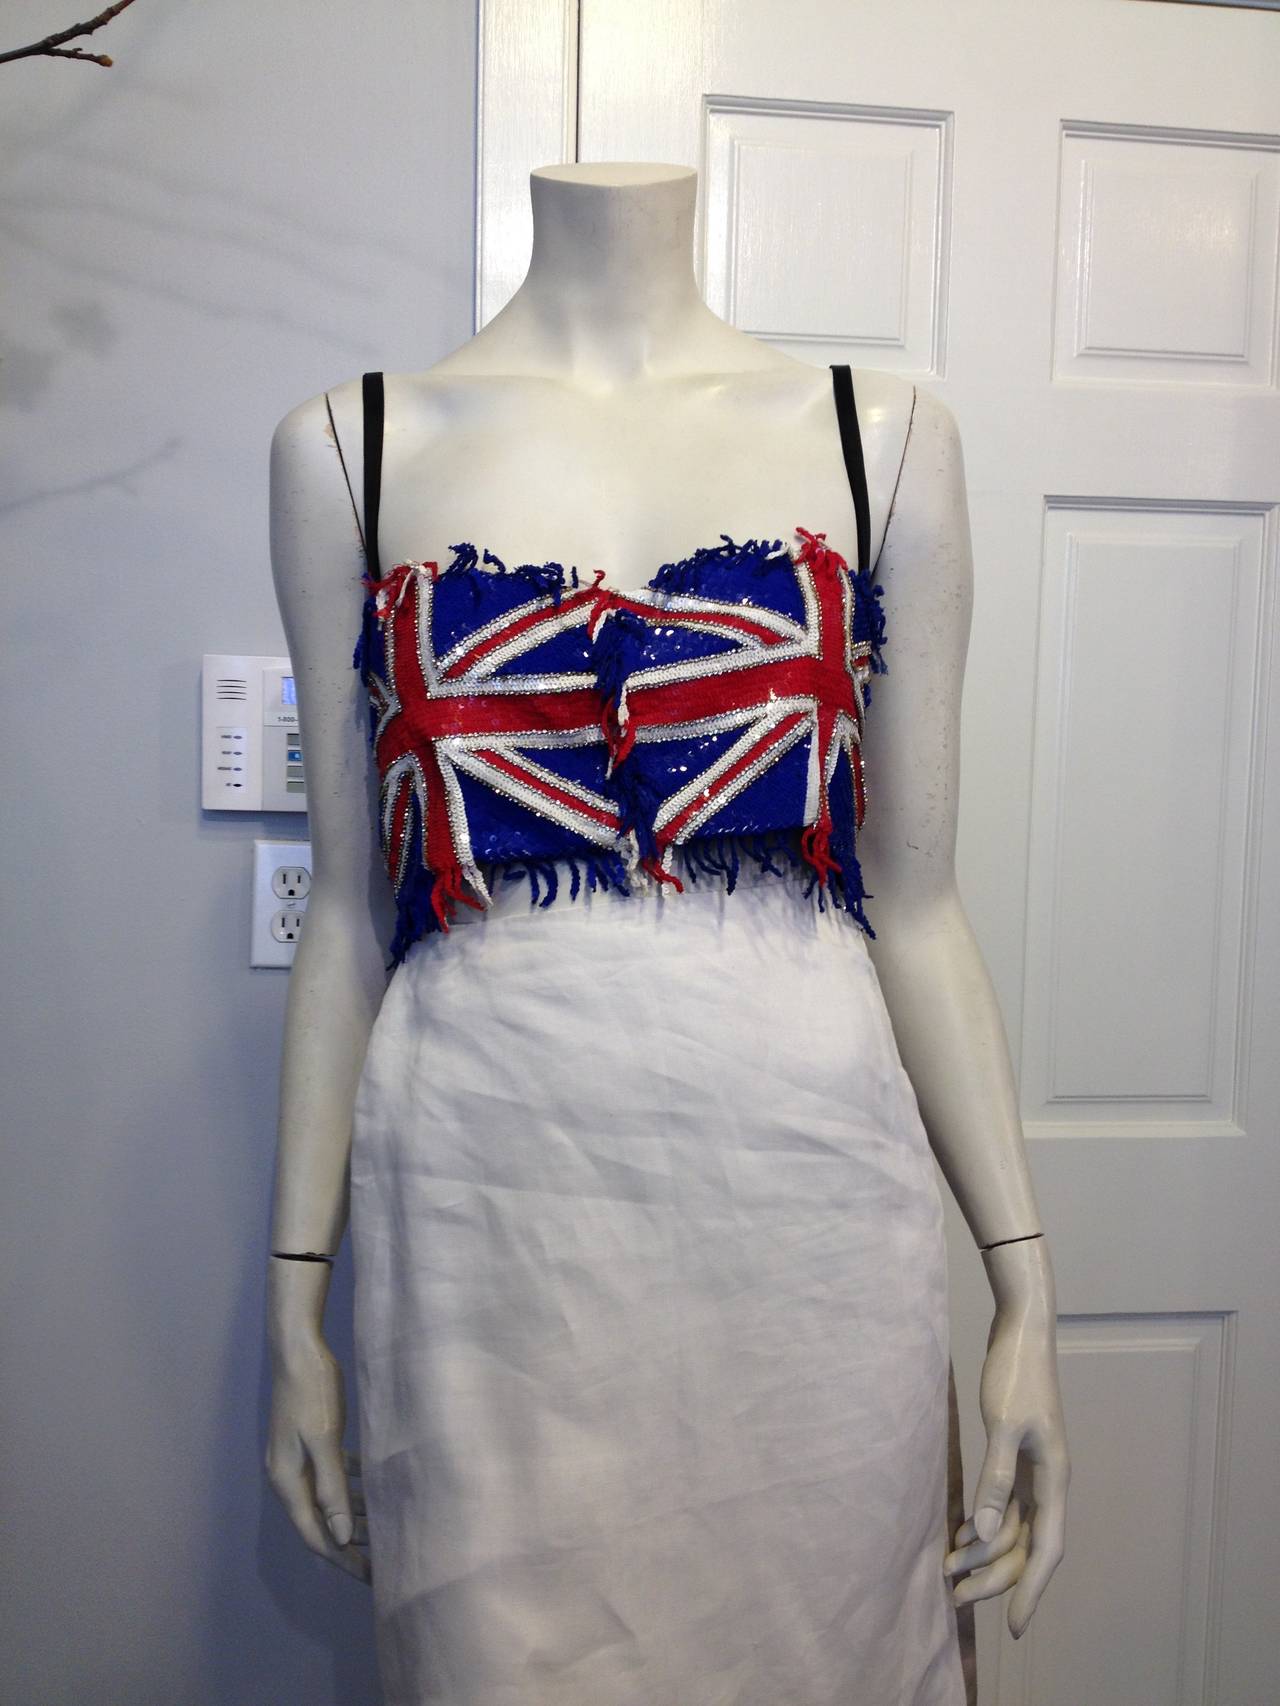 Declare your allegiance to the flag! This Dolce & Gabbana bustier is the perfect way to show your true colors. The Union Jack is resplendent in red, white, and blue sequins, accented with little rows of rhinestones. The interior is lined with a bra